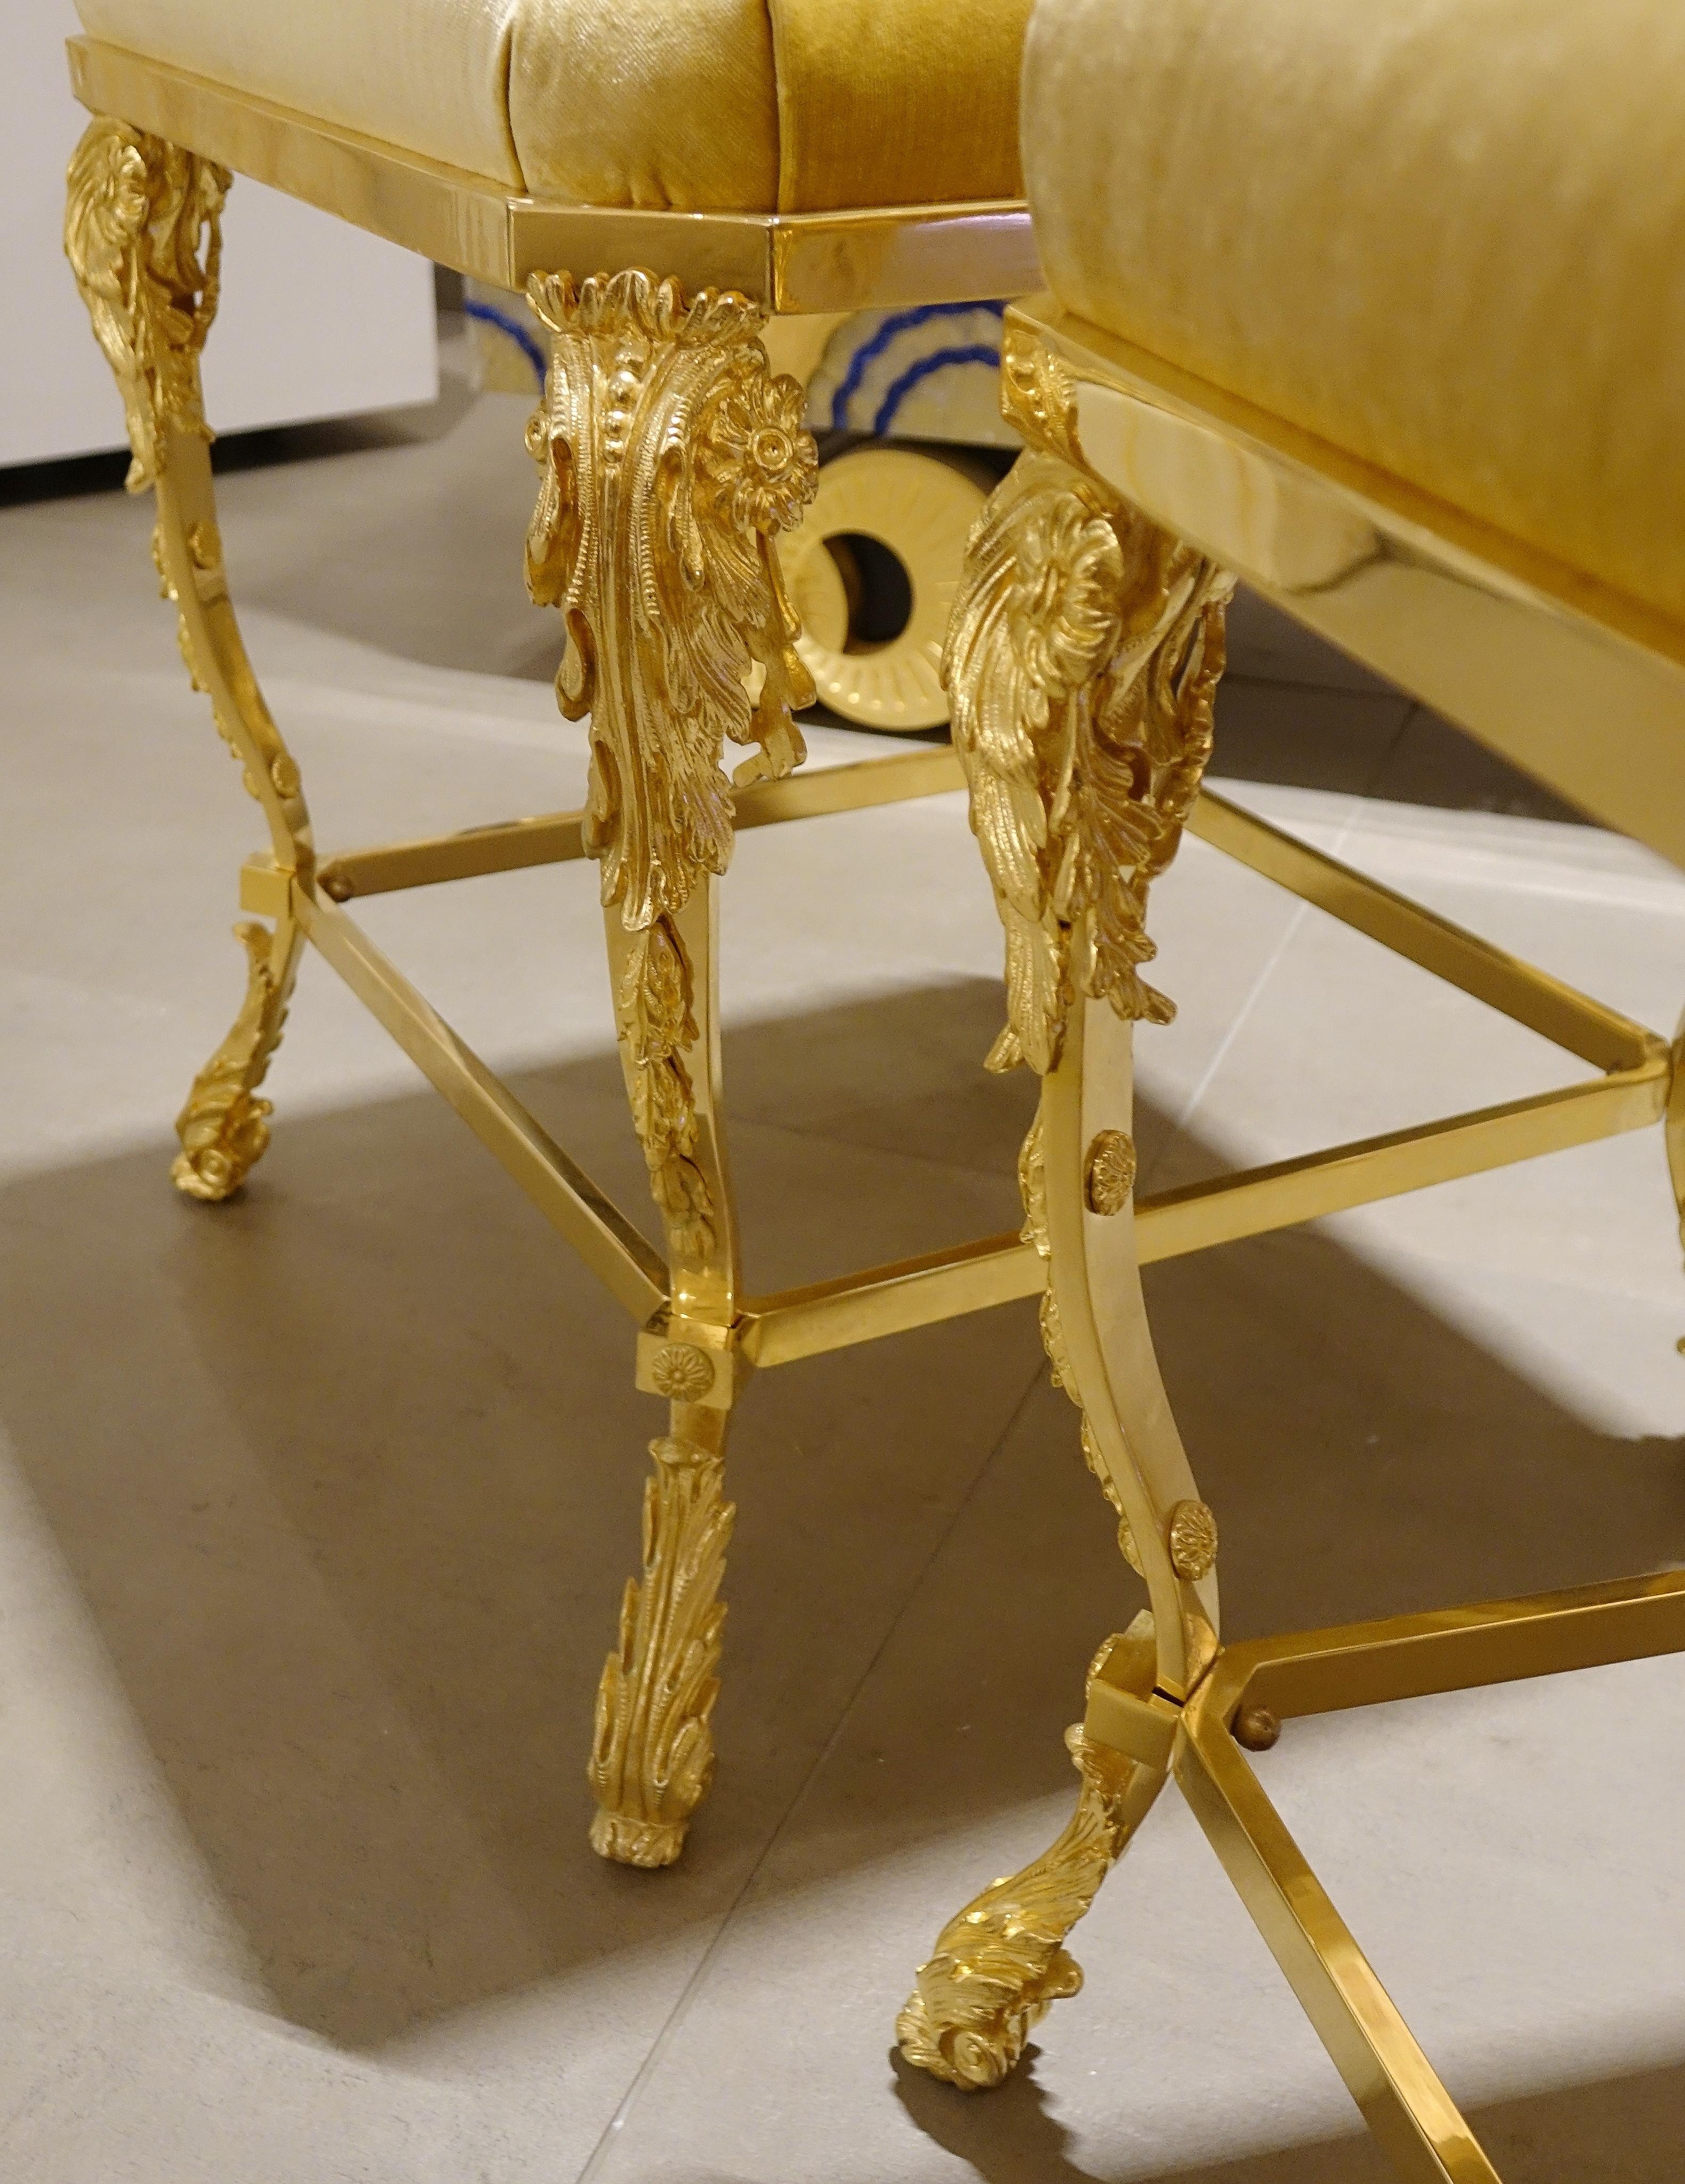 Gilded bronze Pouf stool
Made by the Tosco-Ticciati company.
Unique pieces, in perfect condition.
Measurements: 52 x 51 H 56cm
Tosco Ticciati, a long tradition of wisdom and artisanal heritage.

Born in the early 1970s, as an artisan workshop